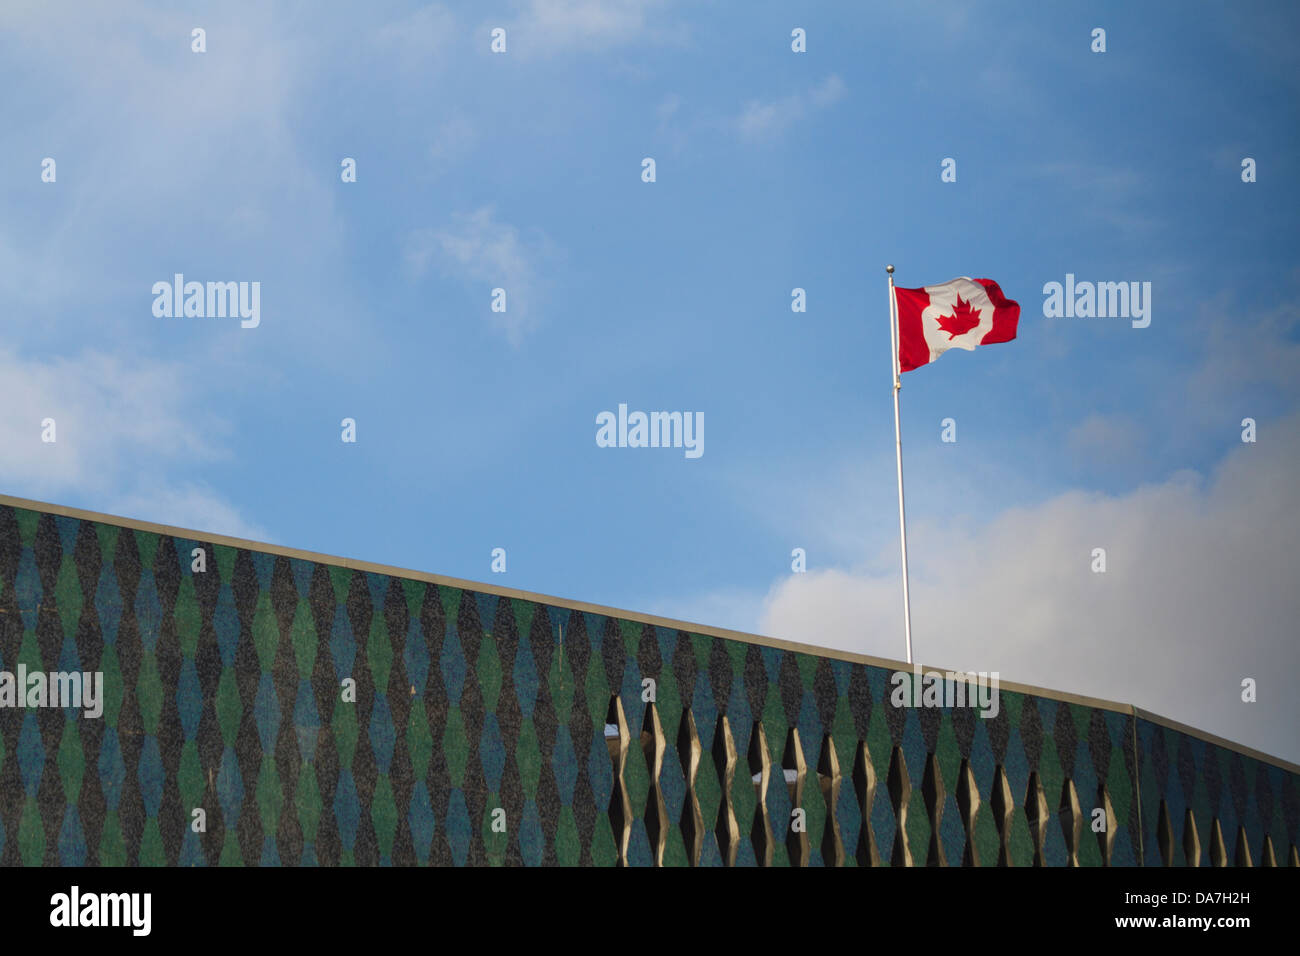 The Canadian flag blowing in the wind Stock Photo